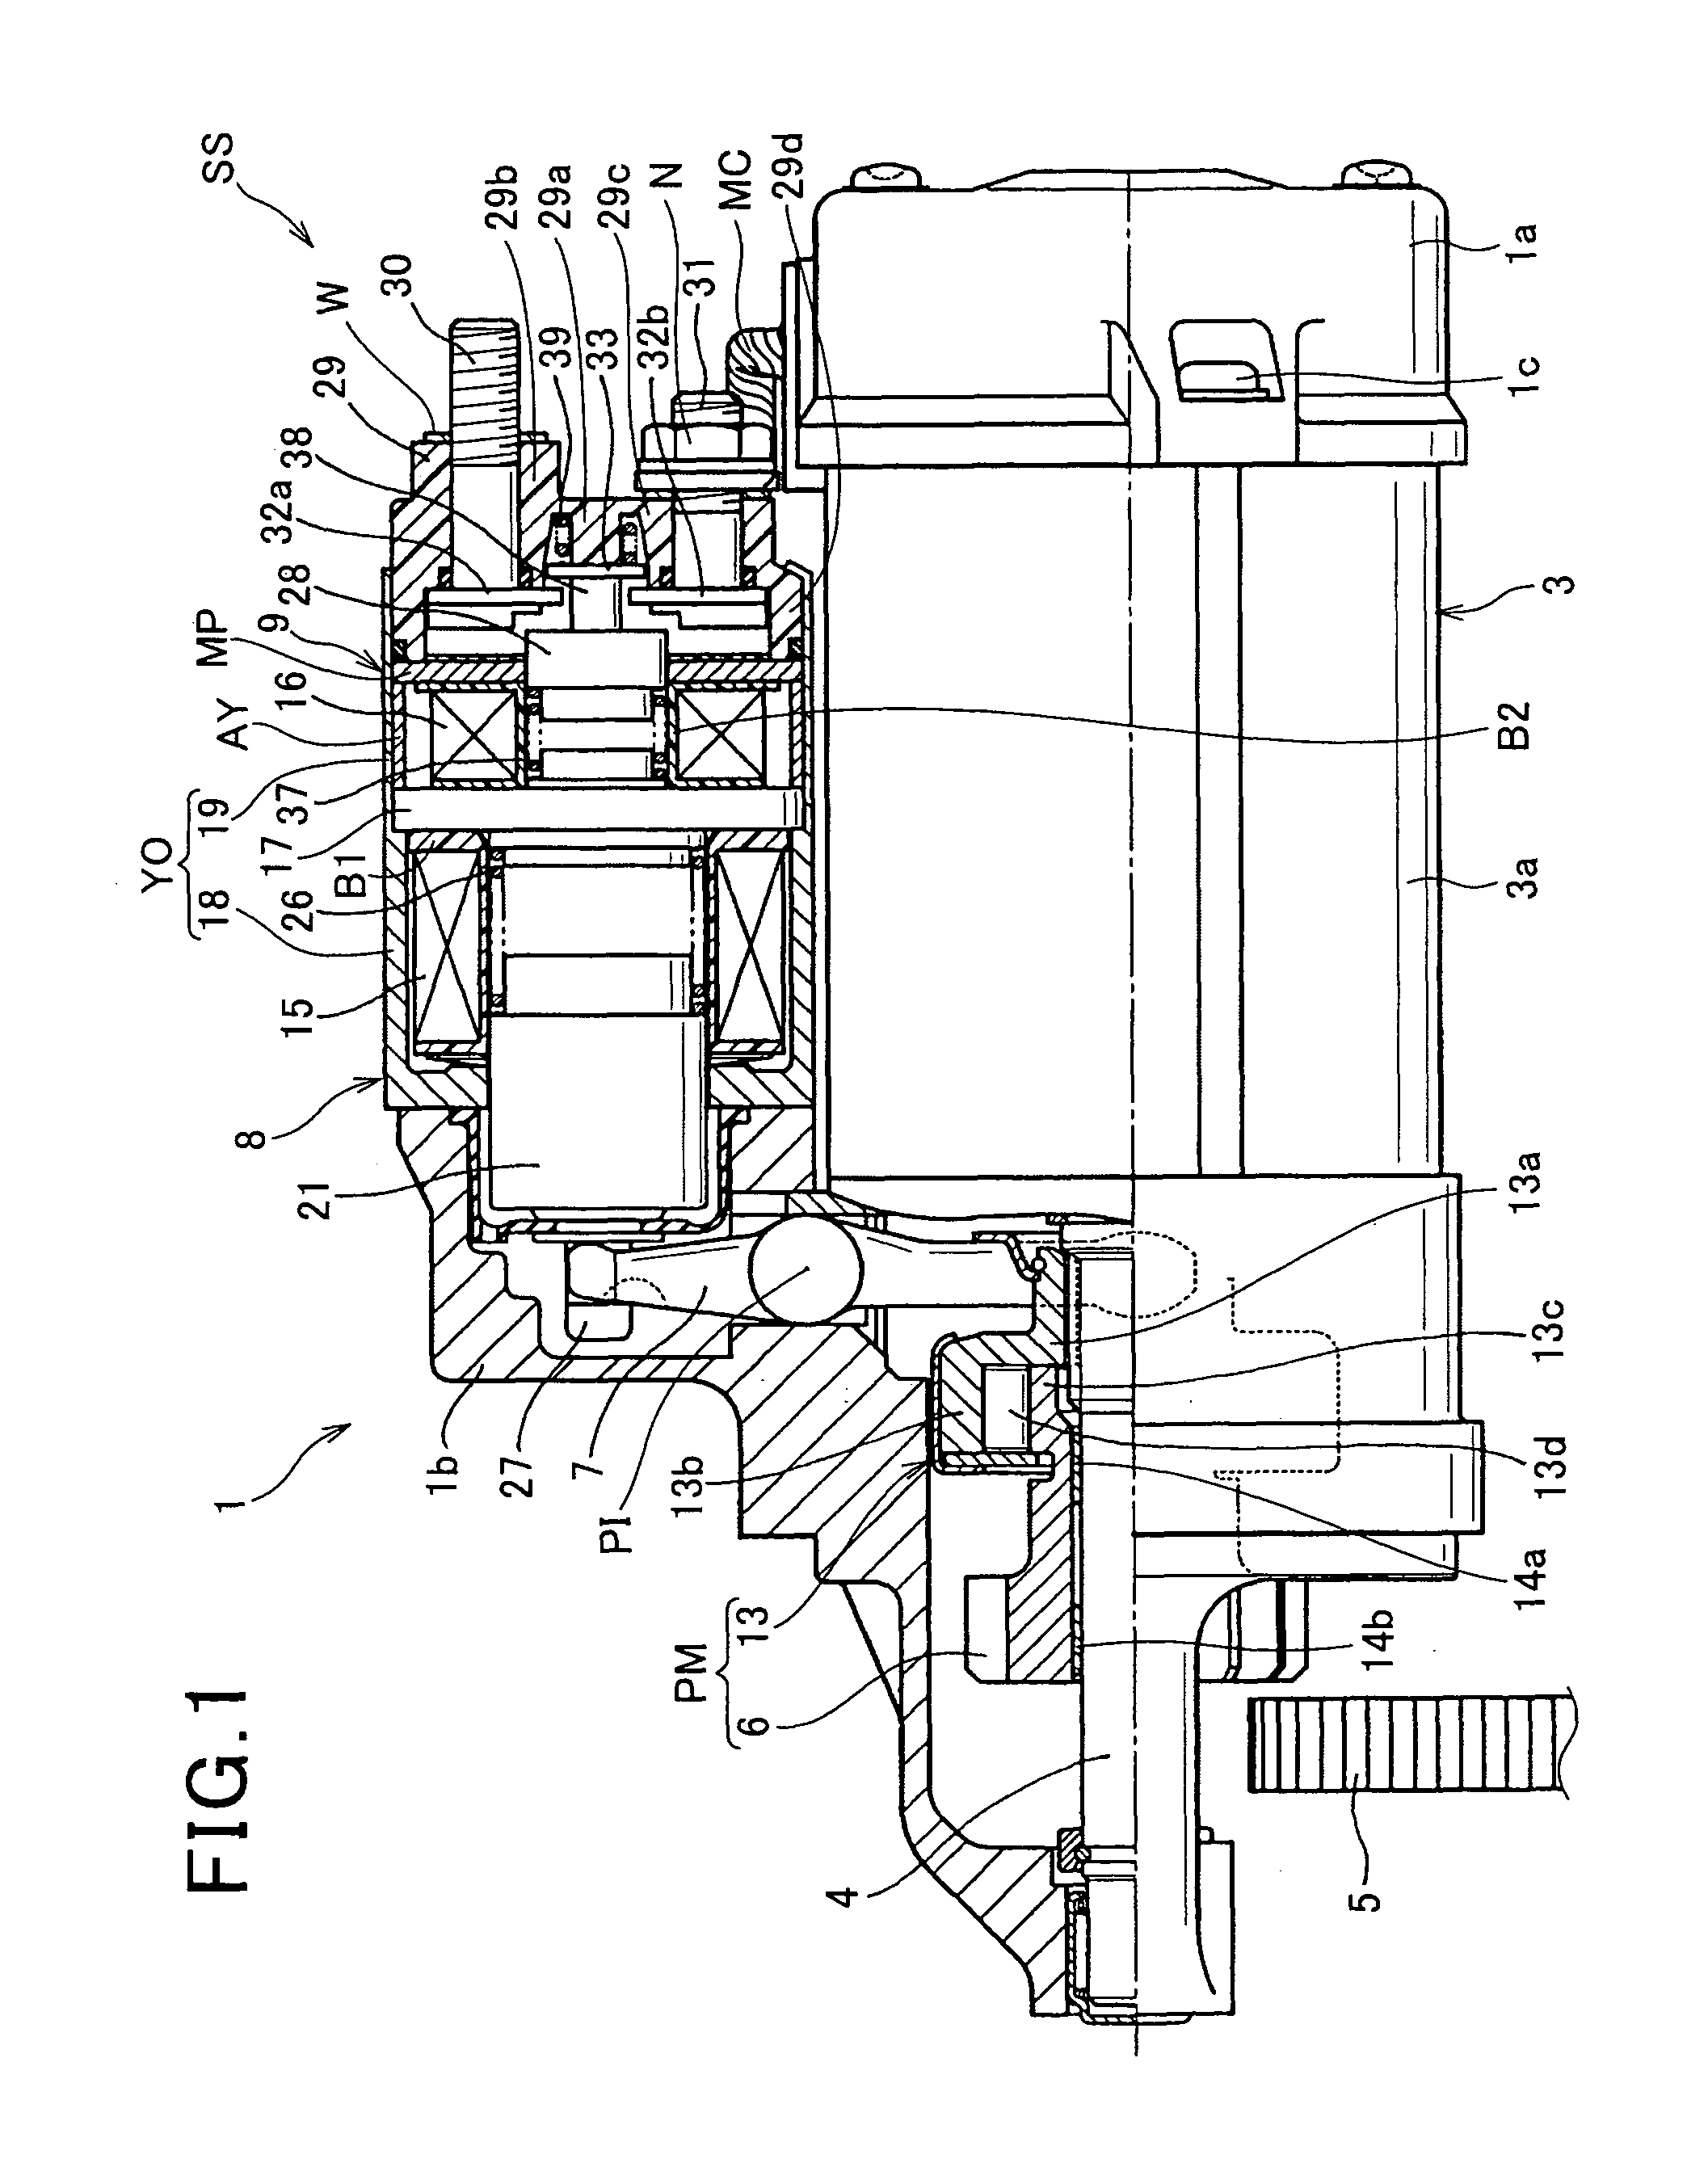 System for starting internal combustion engine